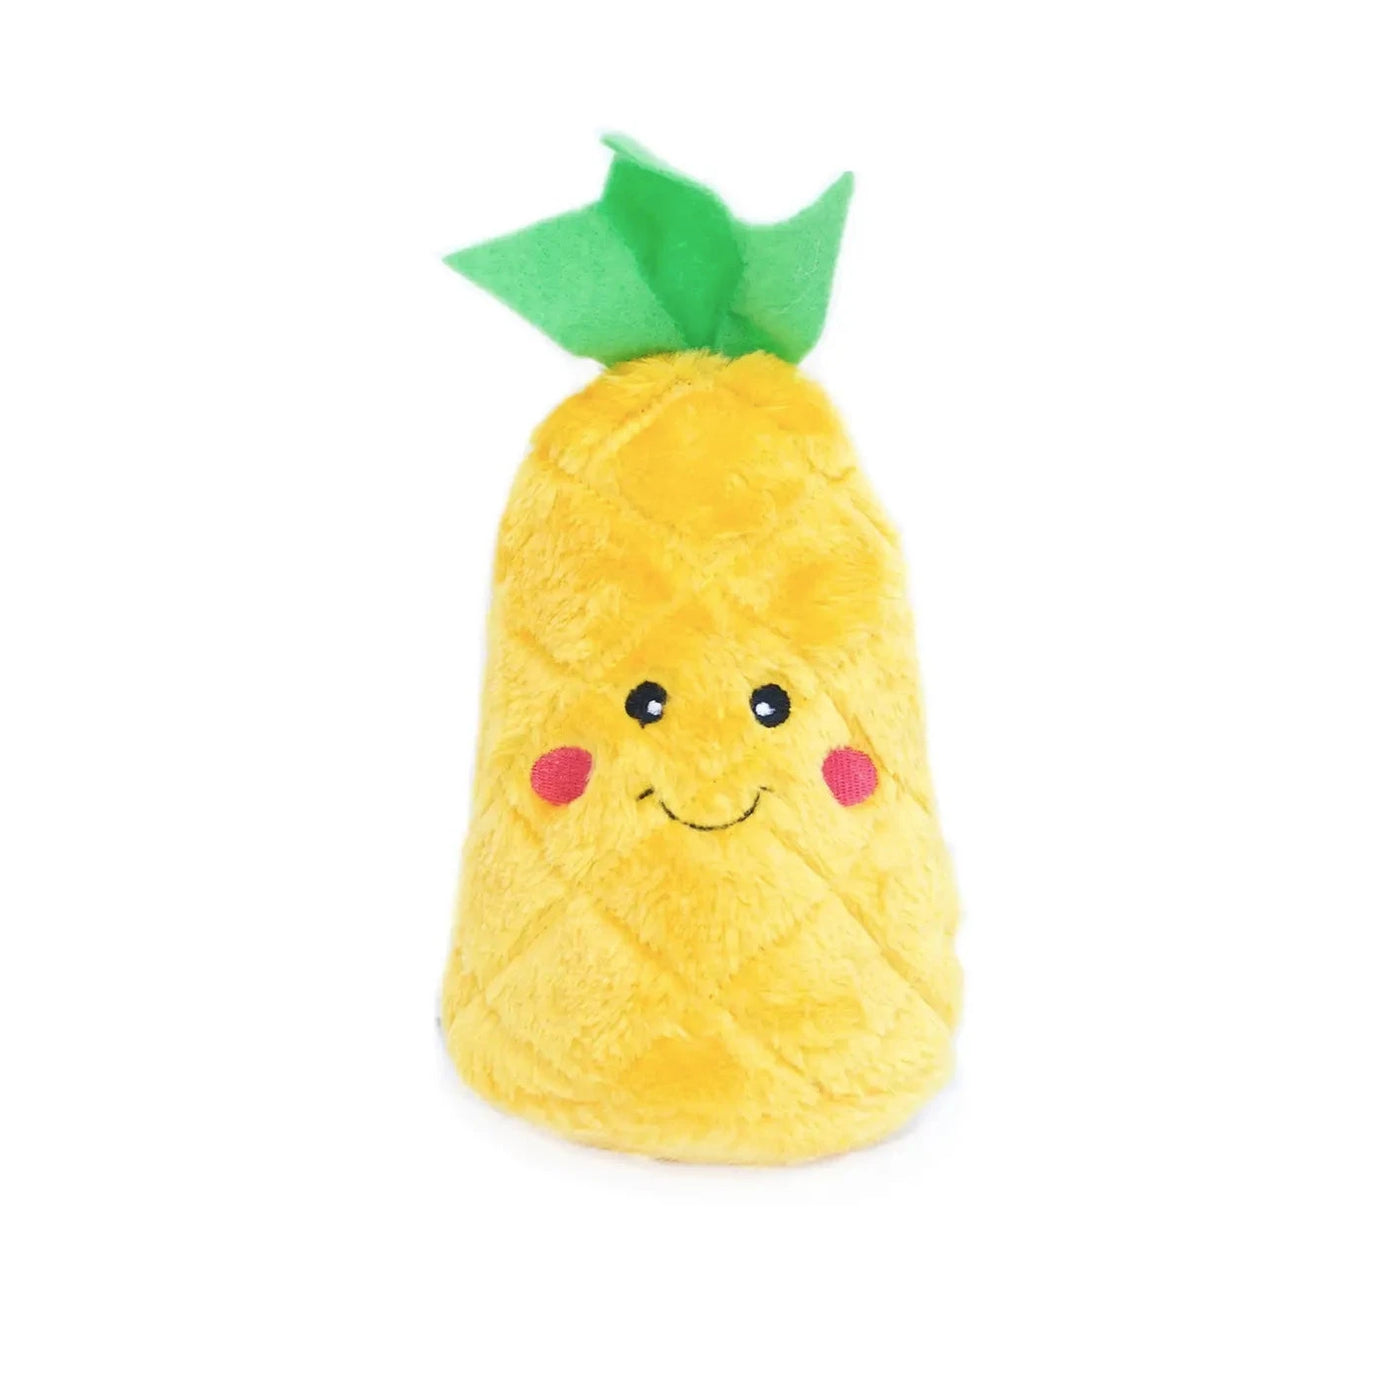 plush pineapple dog toy with a smiley face